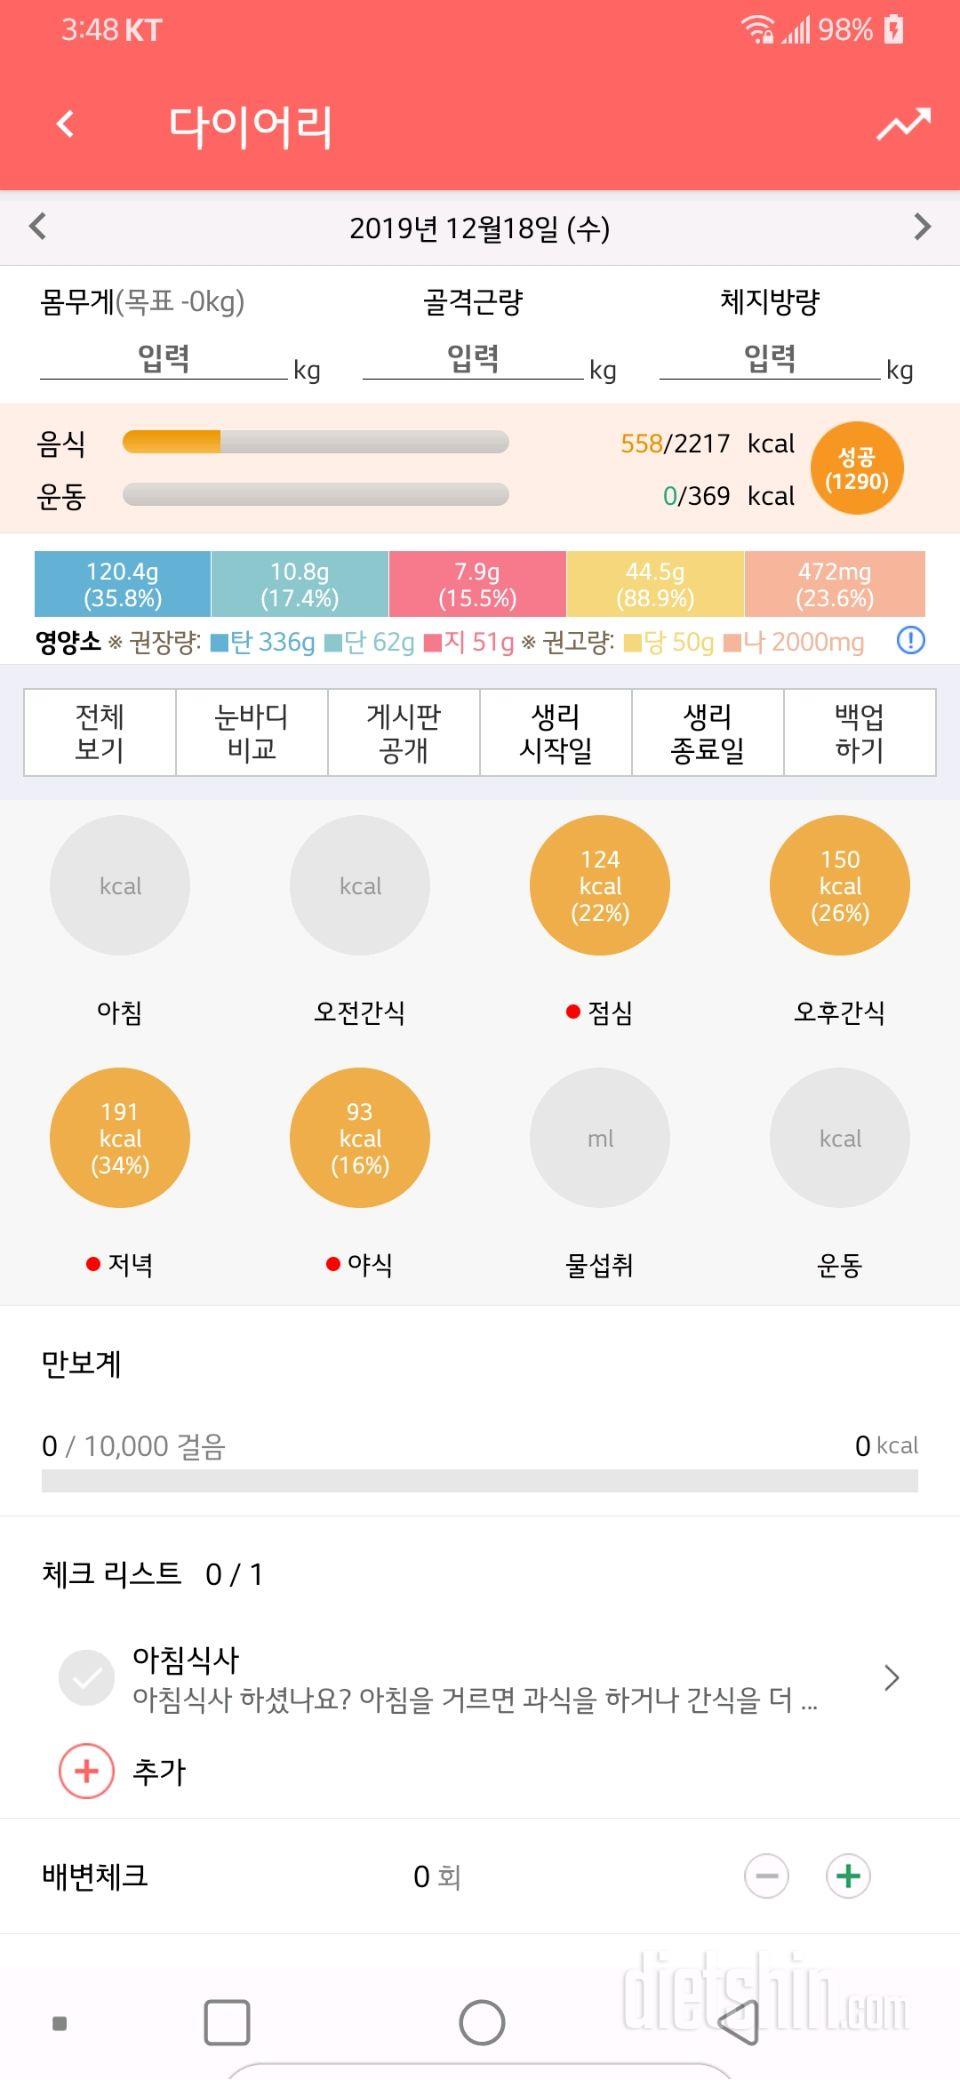 12월 18일 수욜